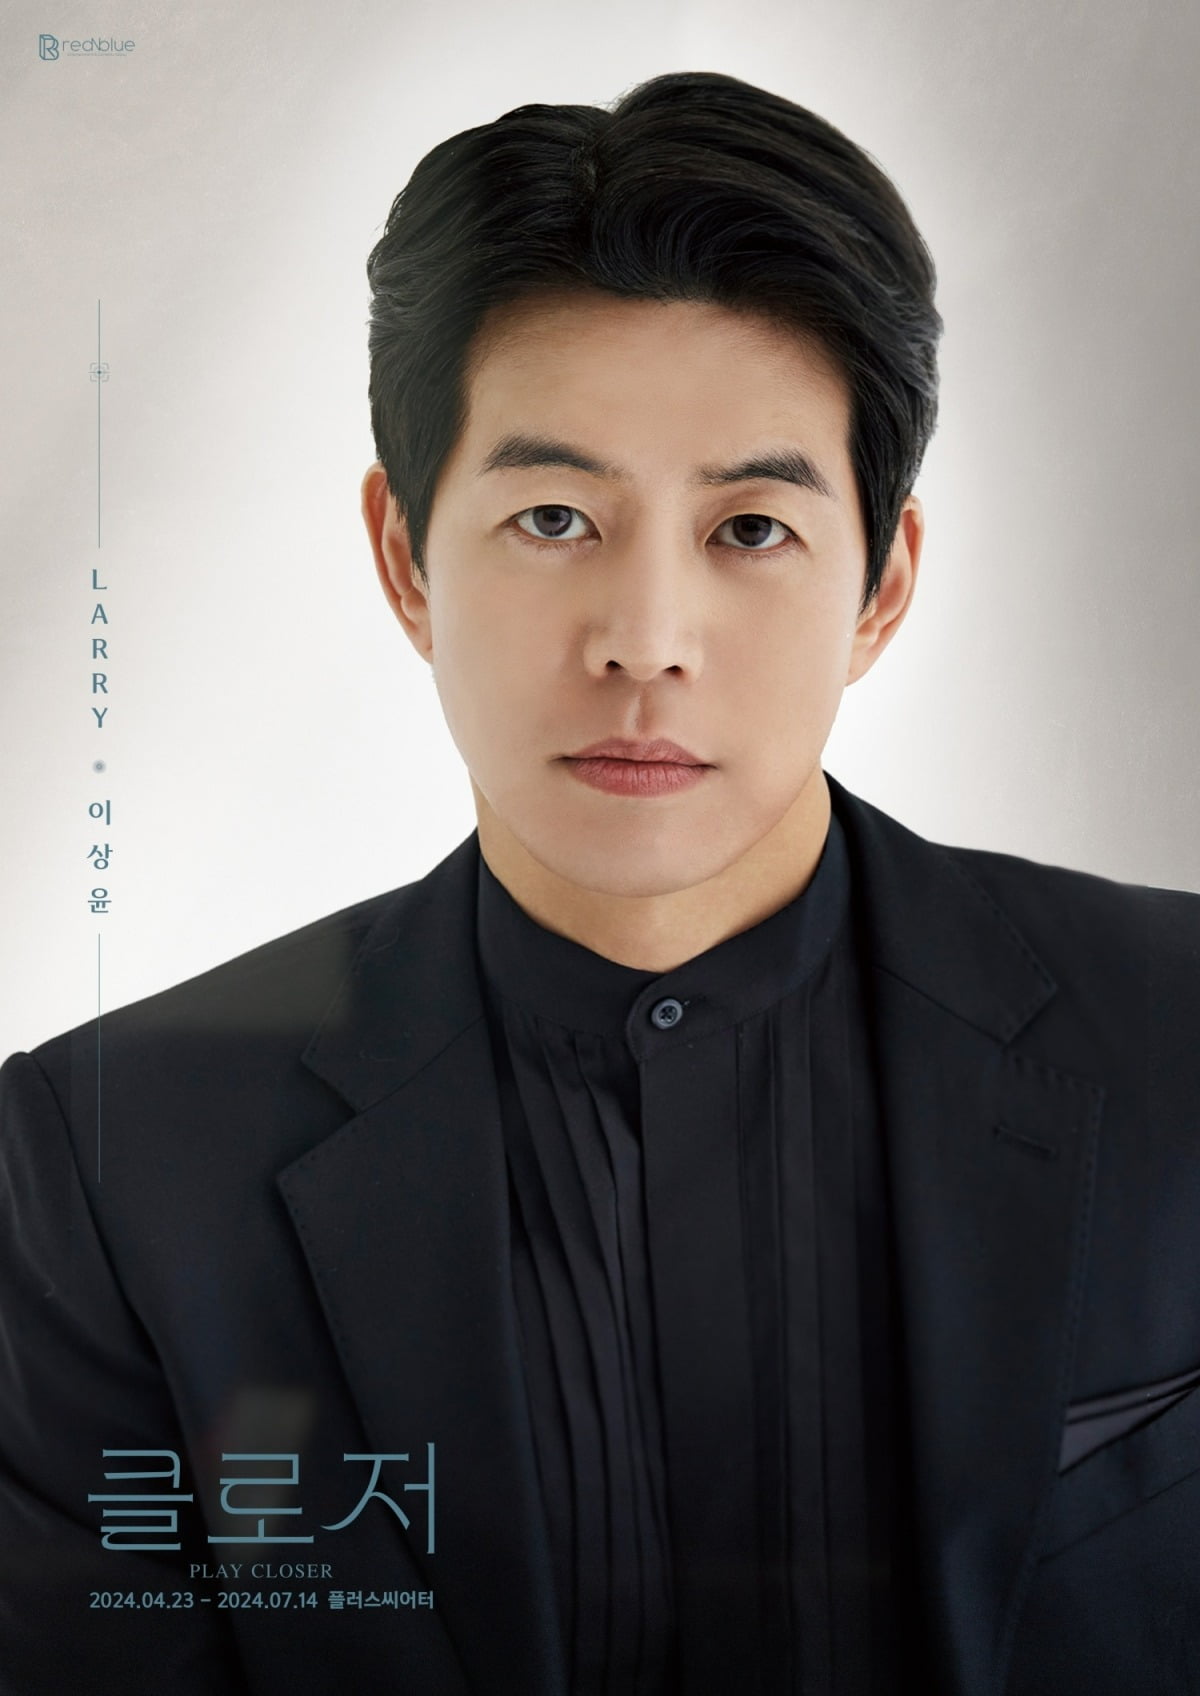 Lee Sang-yoon returns to the theater stage after 7 months